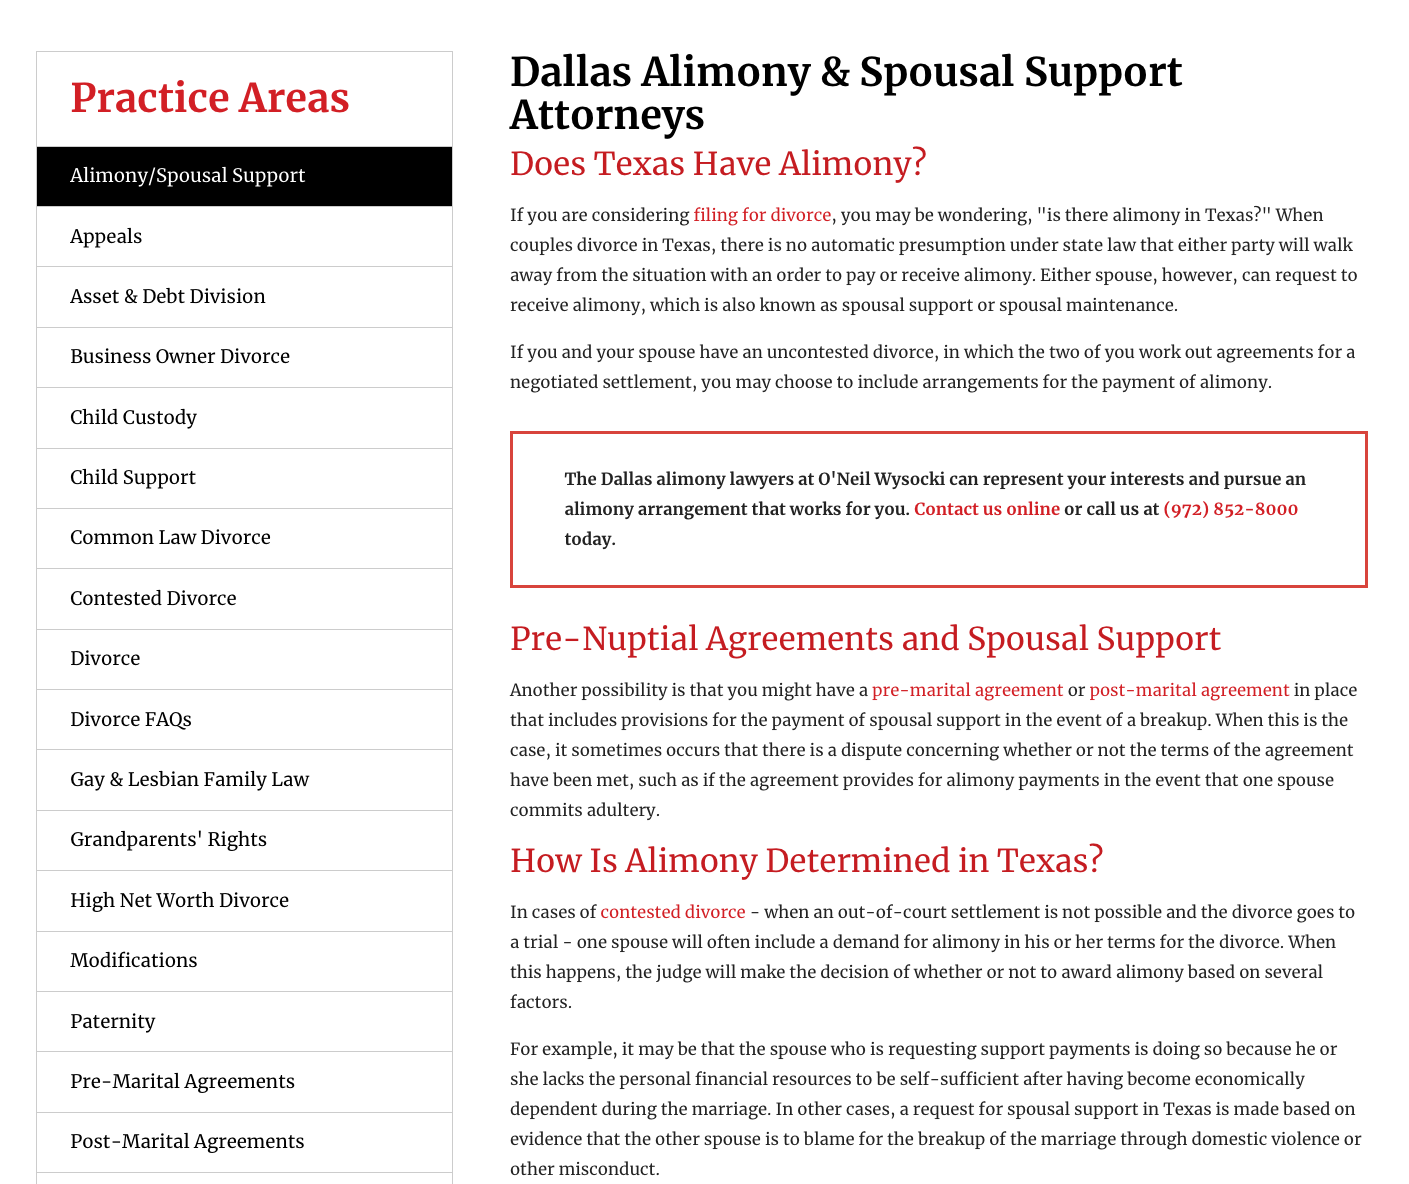 example of law firm practice area pages